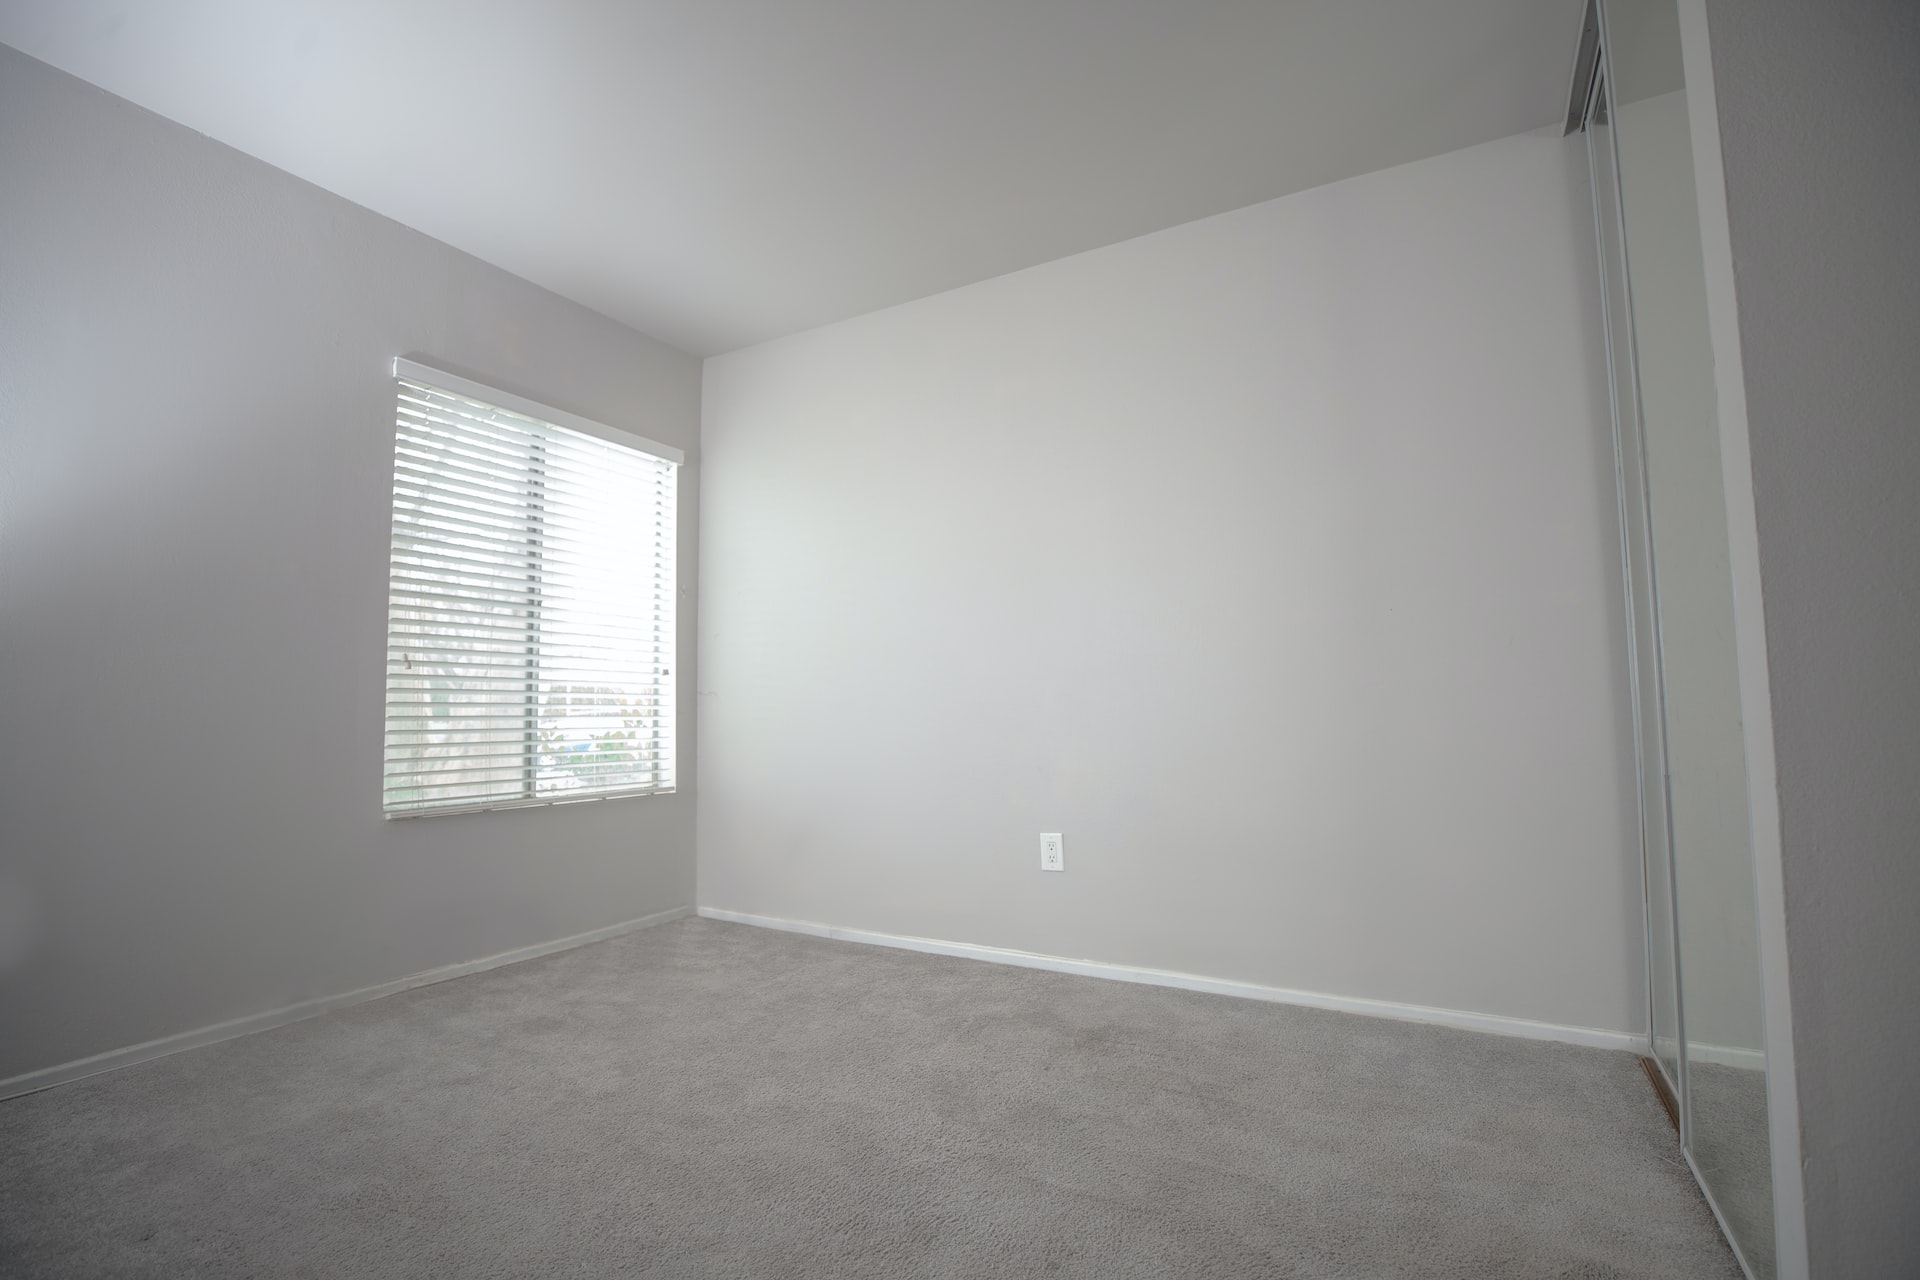 Plain naked room home-interior with blank nude walls and no furnishings